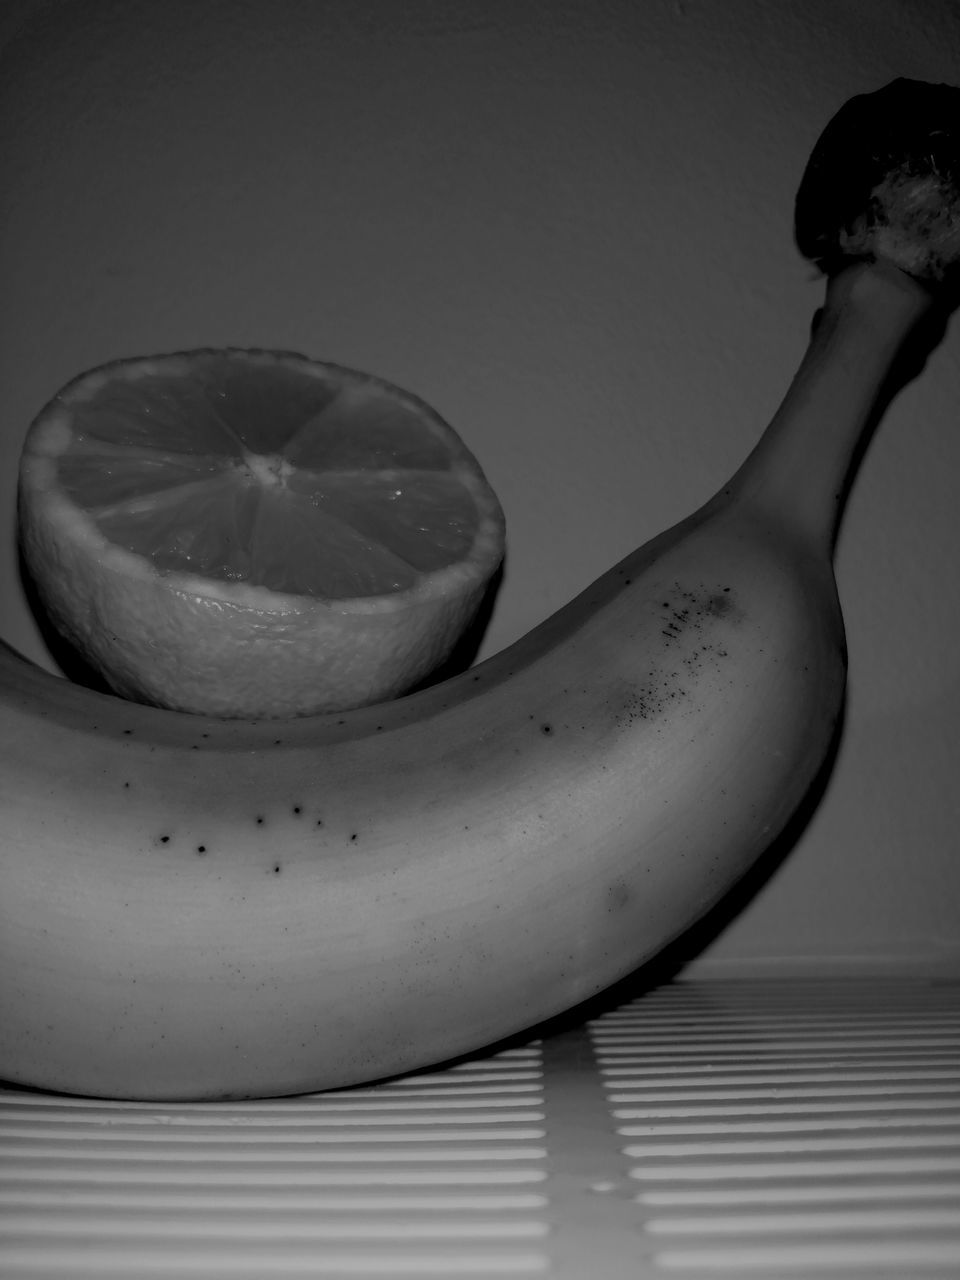 still life photography, black and white, banana, healthy eating, food and drink, food, white, indoors, monochrome photography, monochrome, fruit, black, wellbeing, no people, studio shot, freshness, close-up, still life